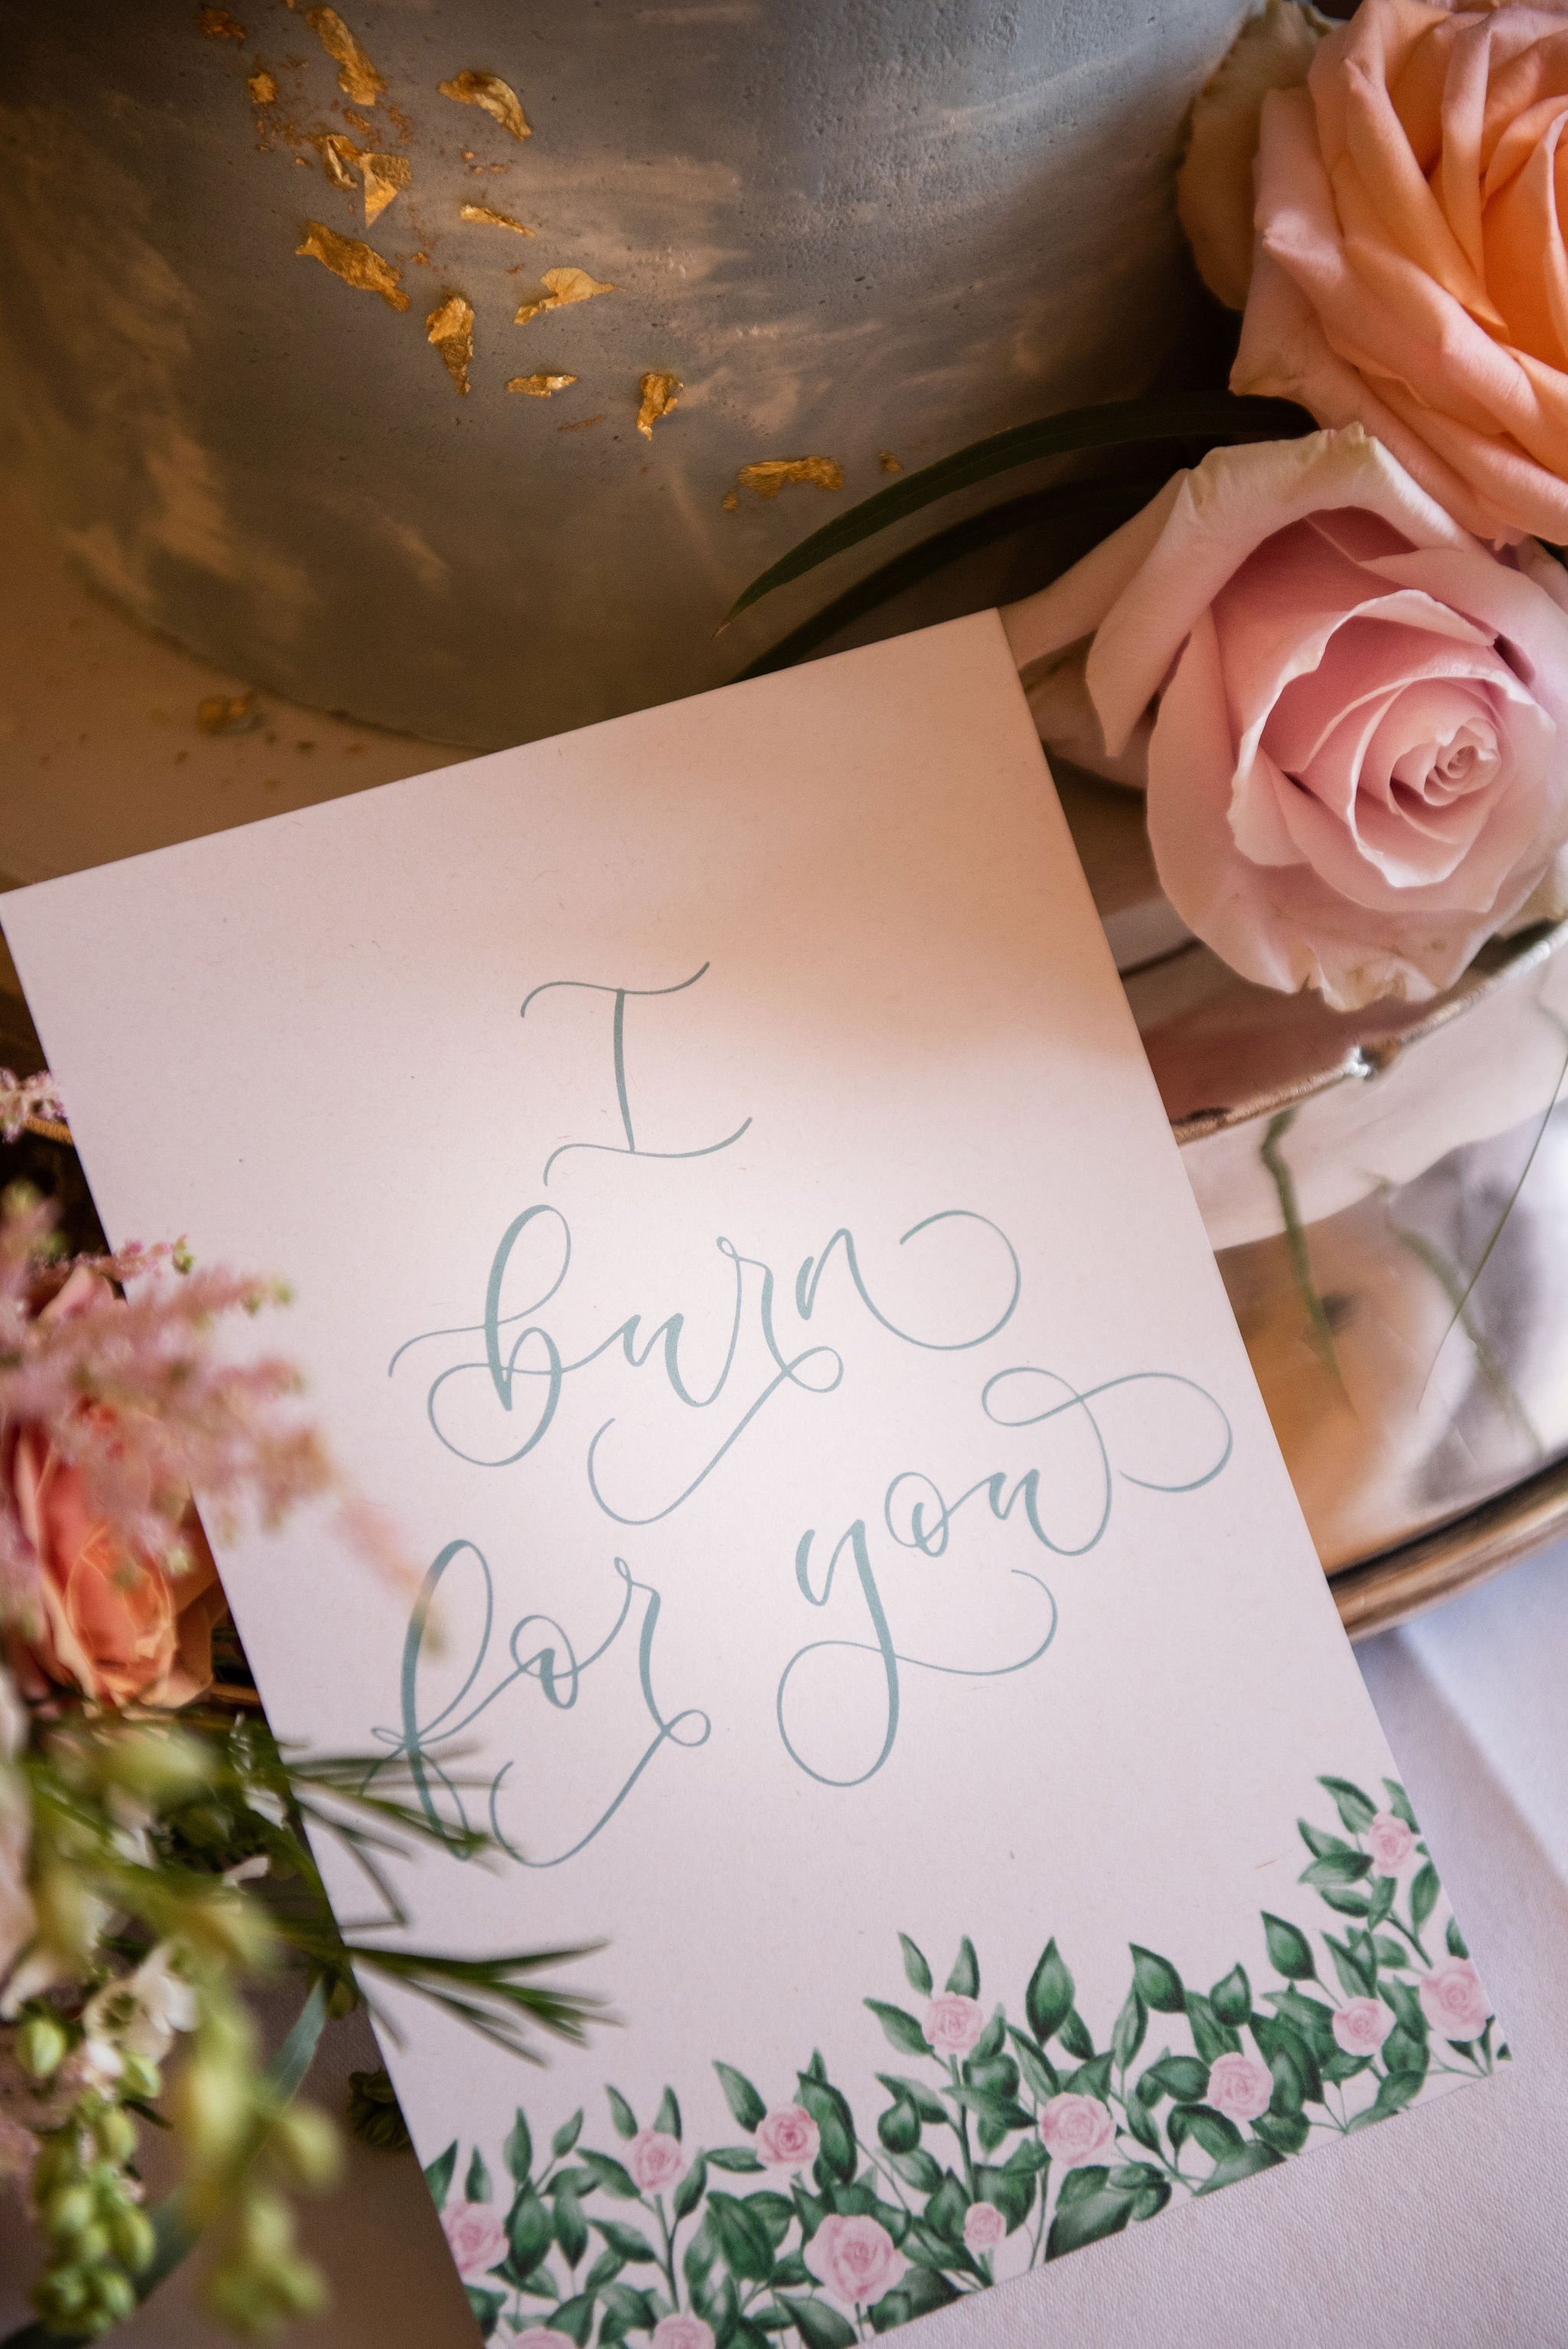 I burn for you Bridgerton wedding sign with hand lettered calligraphy and blush pink rose illustrations.jpg